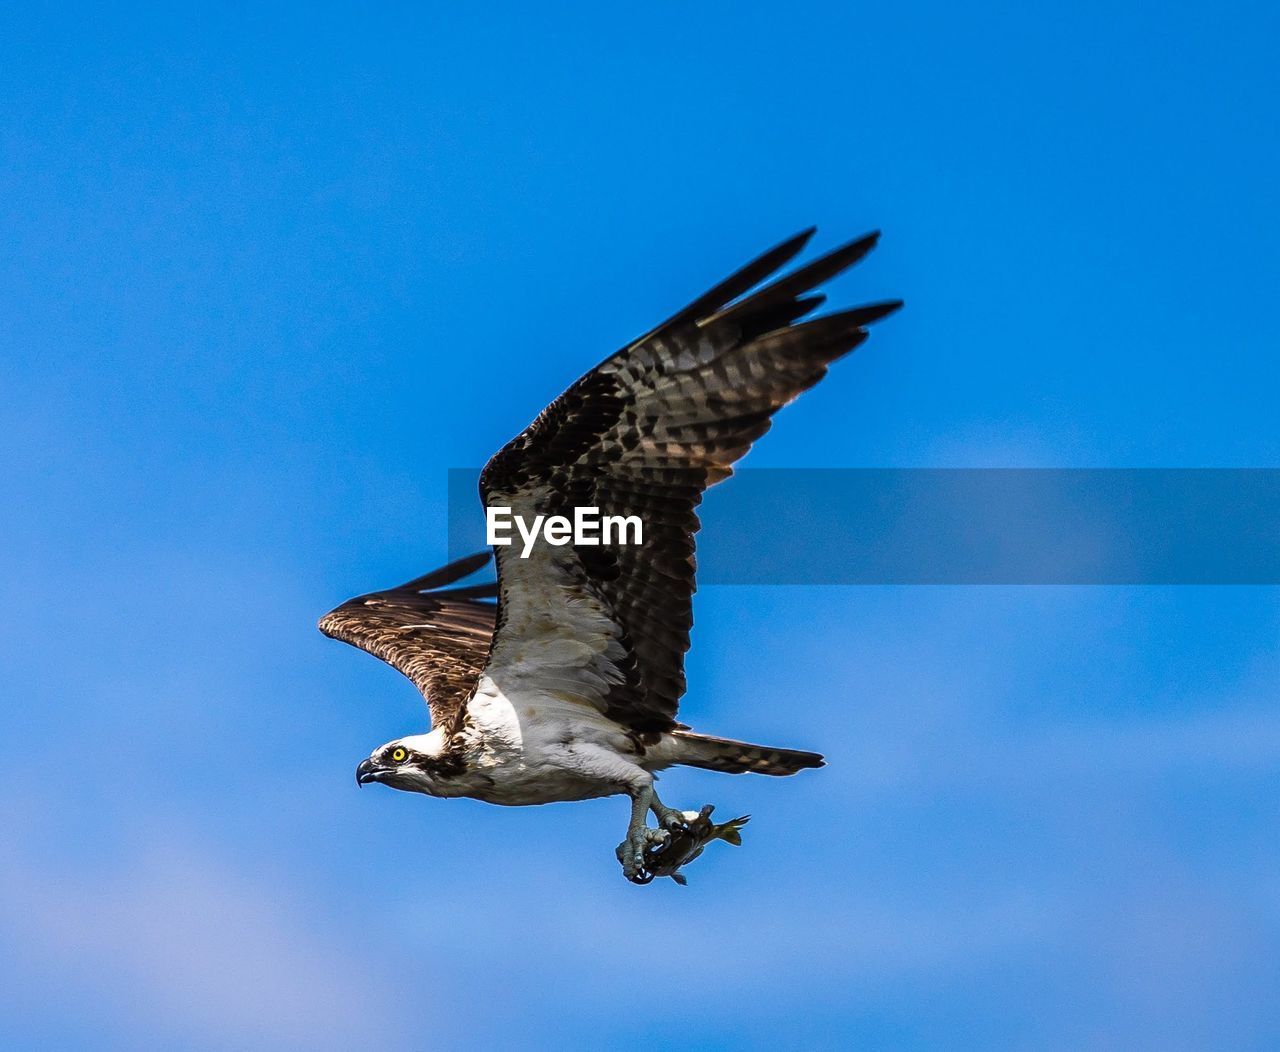 Low angle view of bird flying against clear blue sky, osprey catches two fish